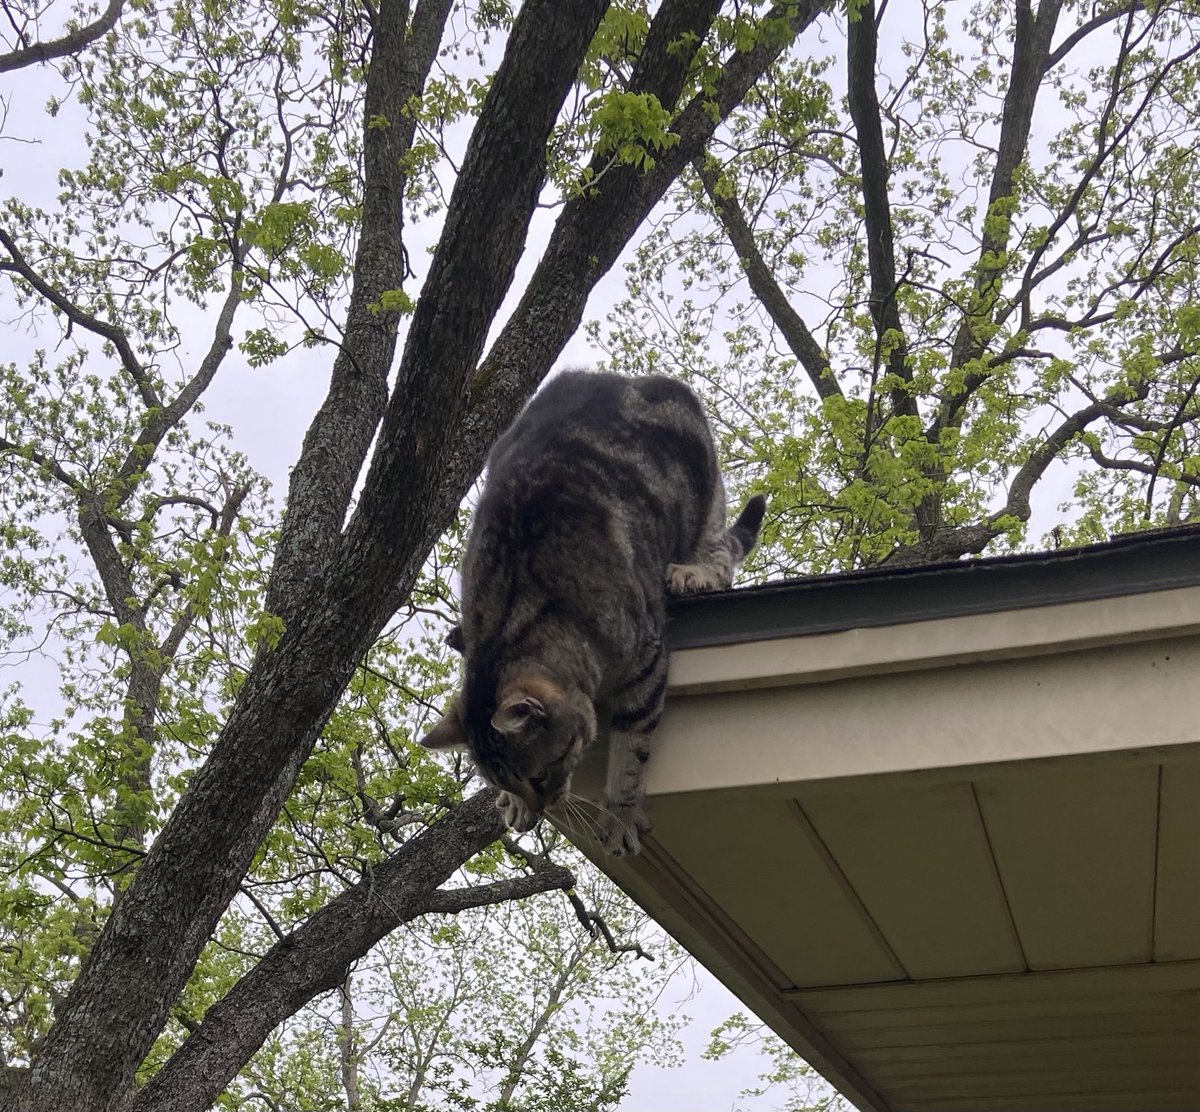 My neighbor’s cat Wendy coming down for breakfast